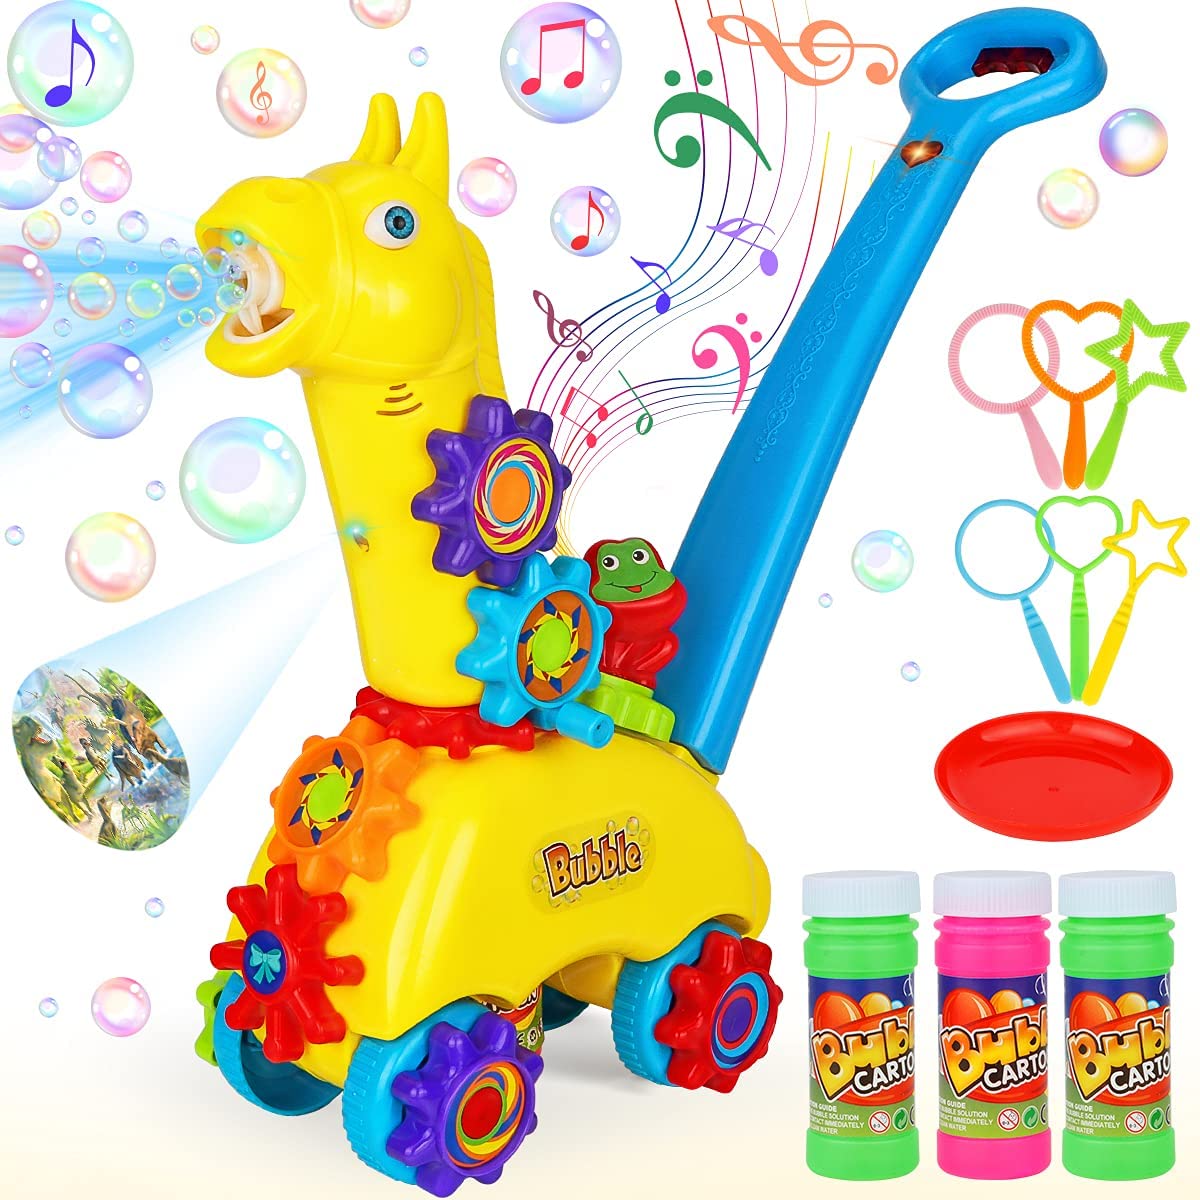 Photo 1 of Hapyland Bubble Machine for Toddlers, Bubble Lawn Mower for Kids Age 3 Bubble Blower Automatic Bubble Maker Indoor Push Toys Outdoor Giraffe Toys with Light & Music for Boys Girls 3 Year Old